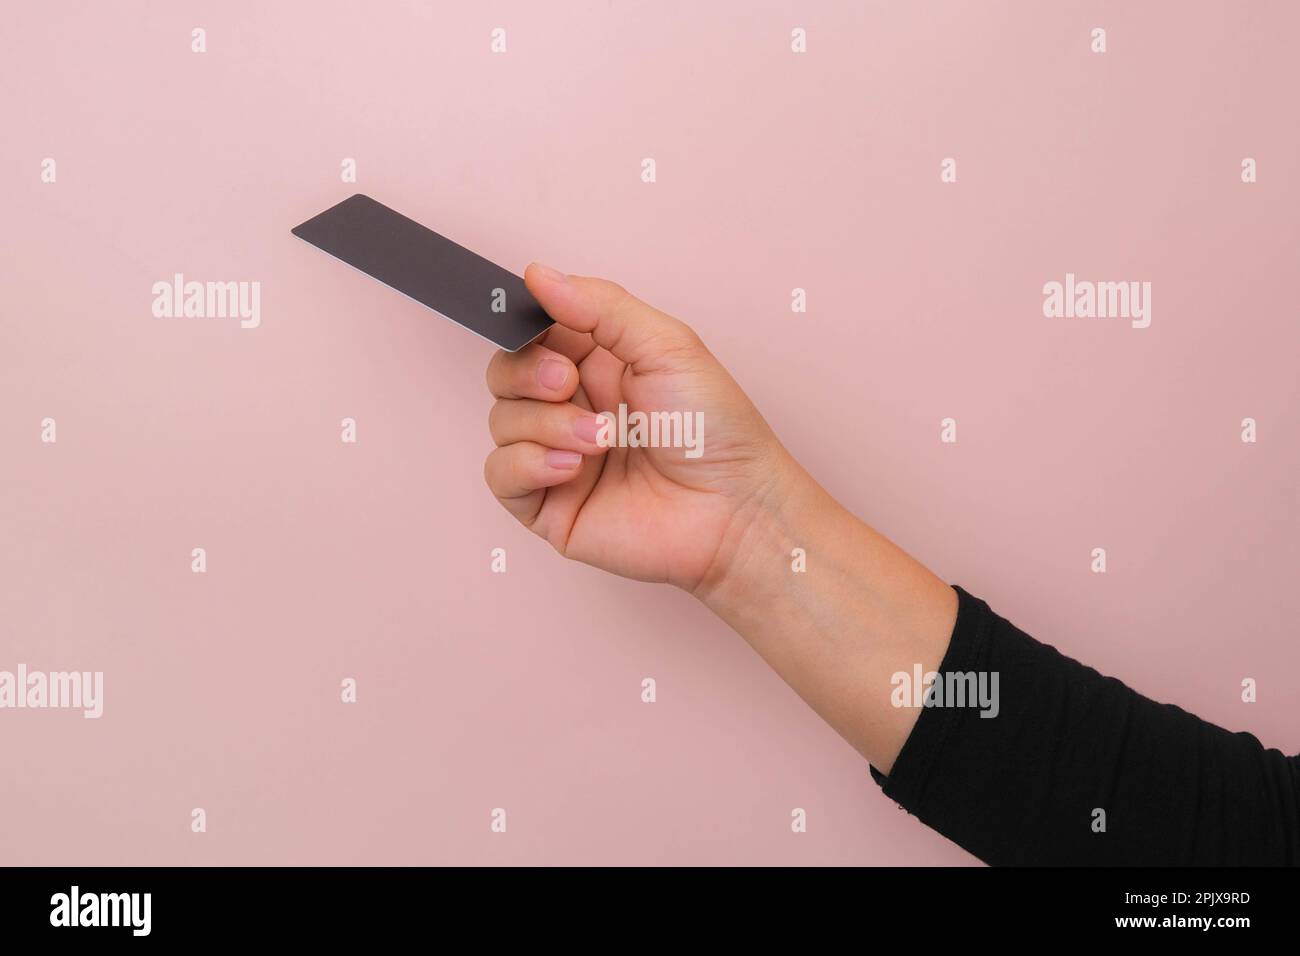 Close up of woman's hand holding blank black card isolated on pink background. Stock Photo